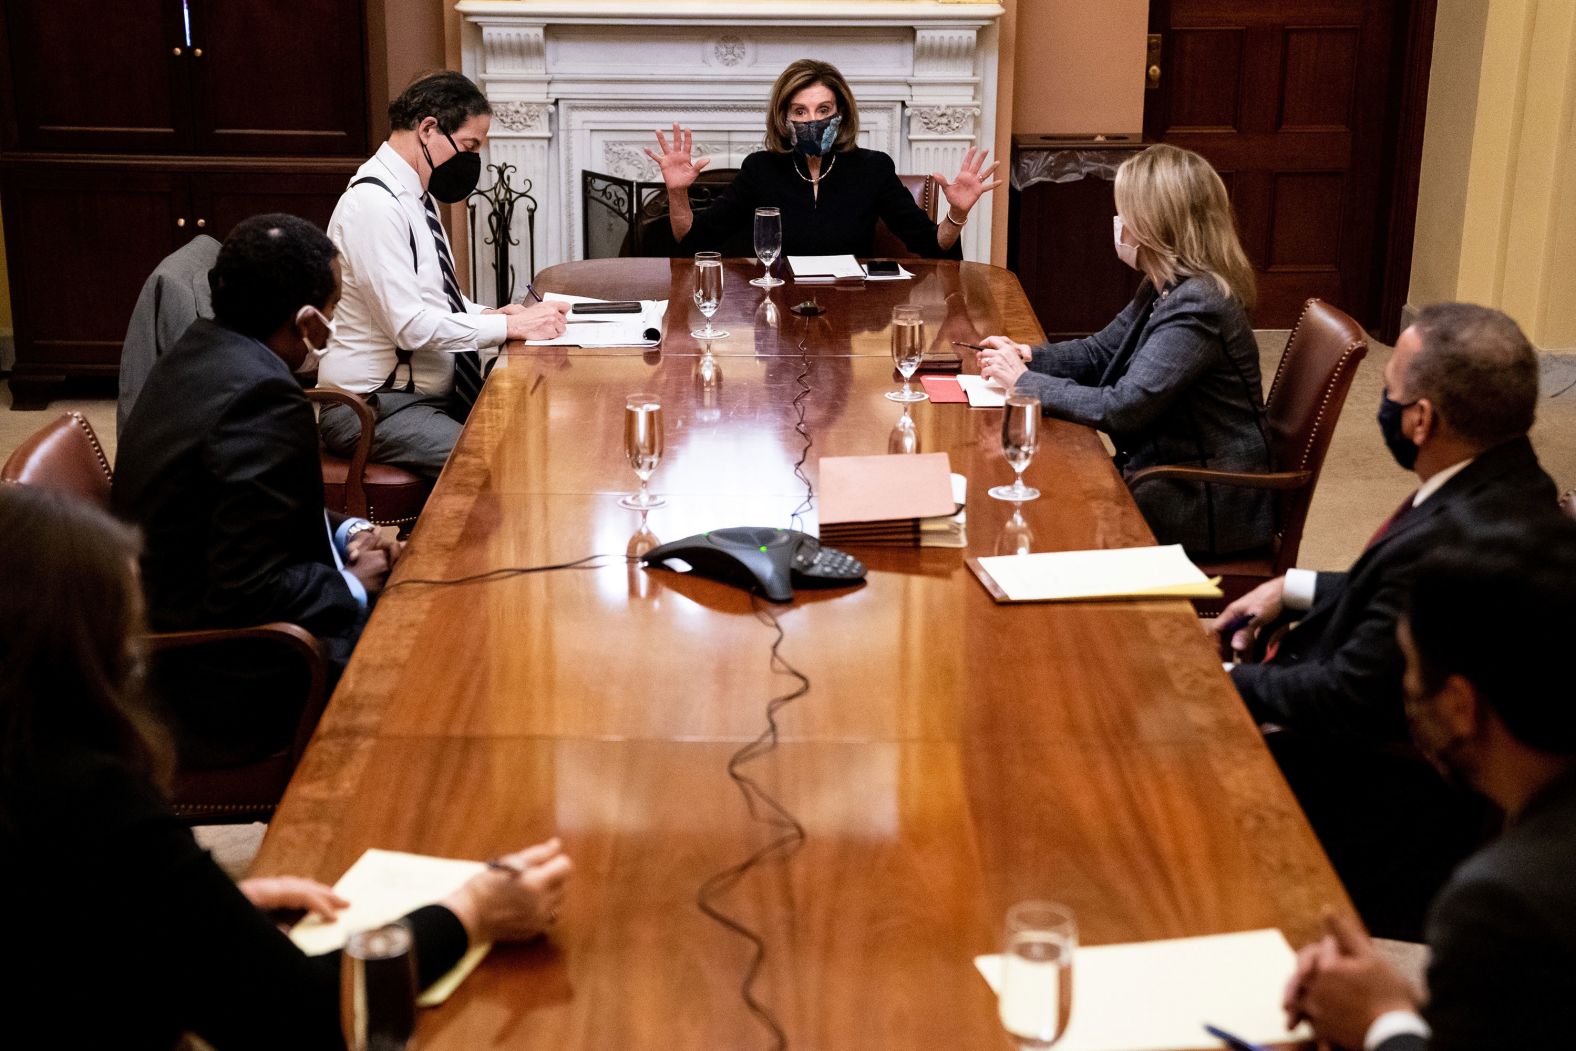 Pelosi meets with the House impeachment managers meet in her office at the Capitol ahead of <a href="index.php?page=&url=https%3A%2F%2Fwww.cnn.com%2F2021%2F01%2F13%2Fpolitics%2Fgallery%2Ftrump-second-impeachment%2Findex.html" target="_blank">Trump's second impeachment vote</a> in January 2021. Trump is the only president in history to be impeached twice. He was acquitted both times.